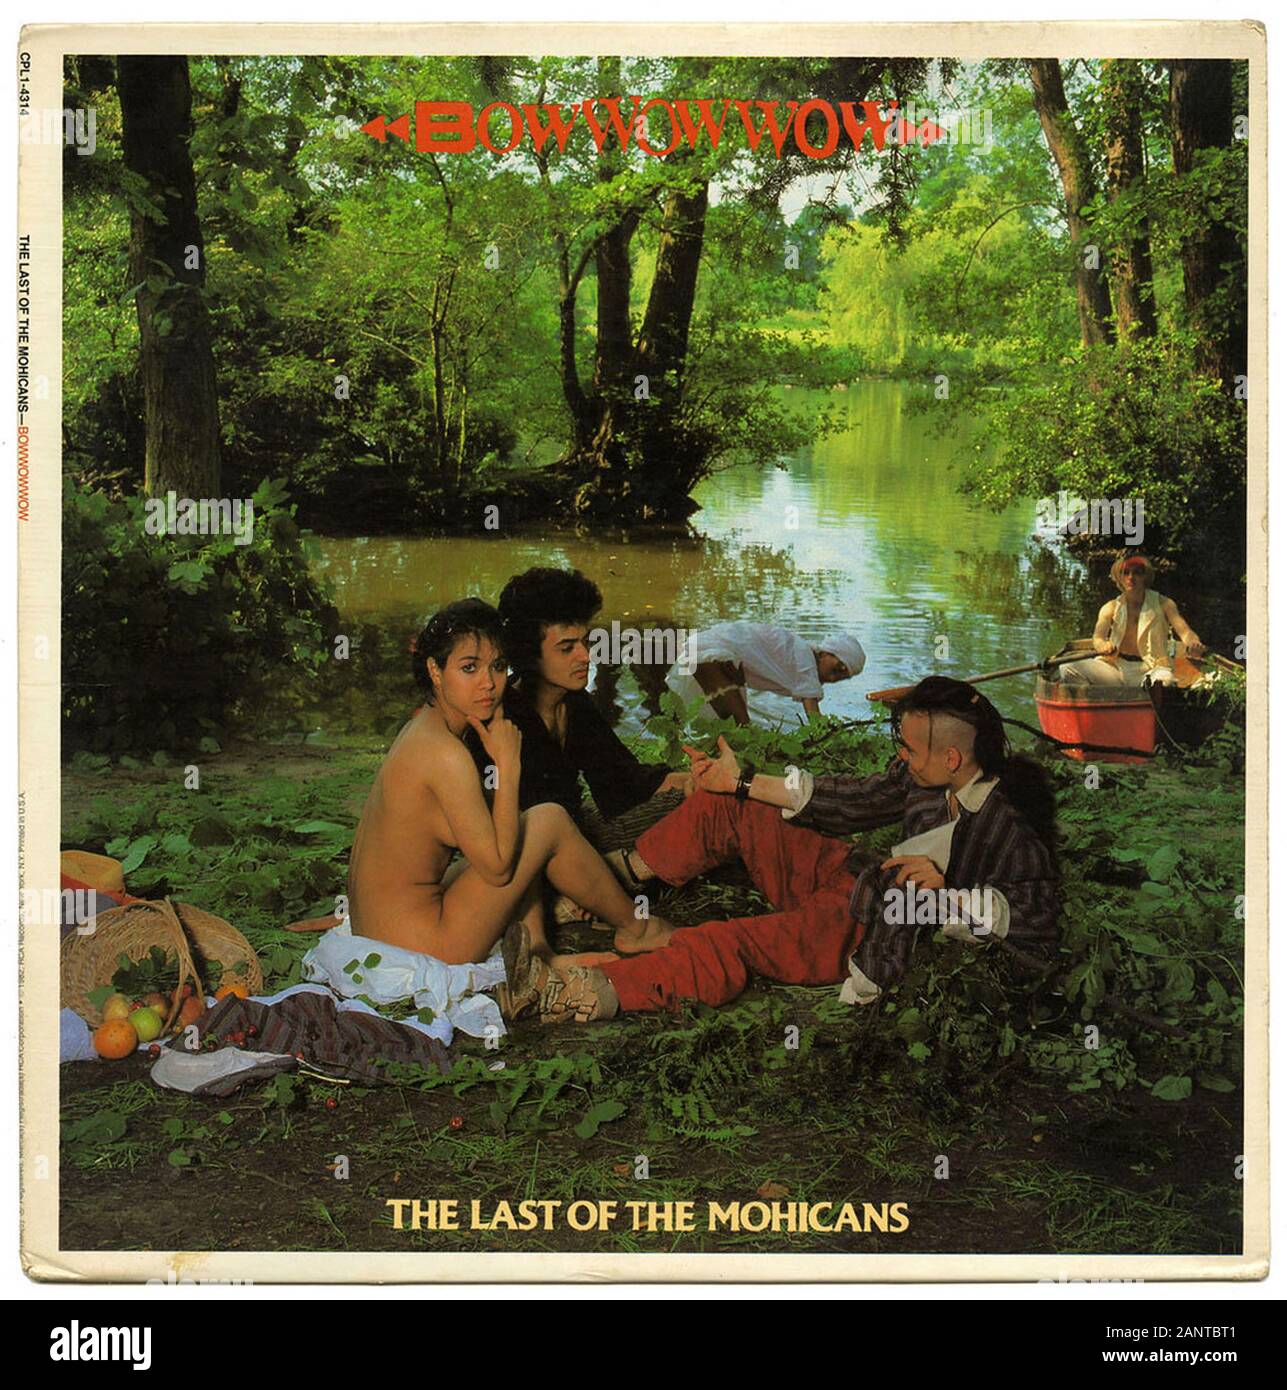 Bow Wow Wow - The Last Of The Mohicans - Classic vintage vinyl album Stock Photo